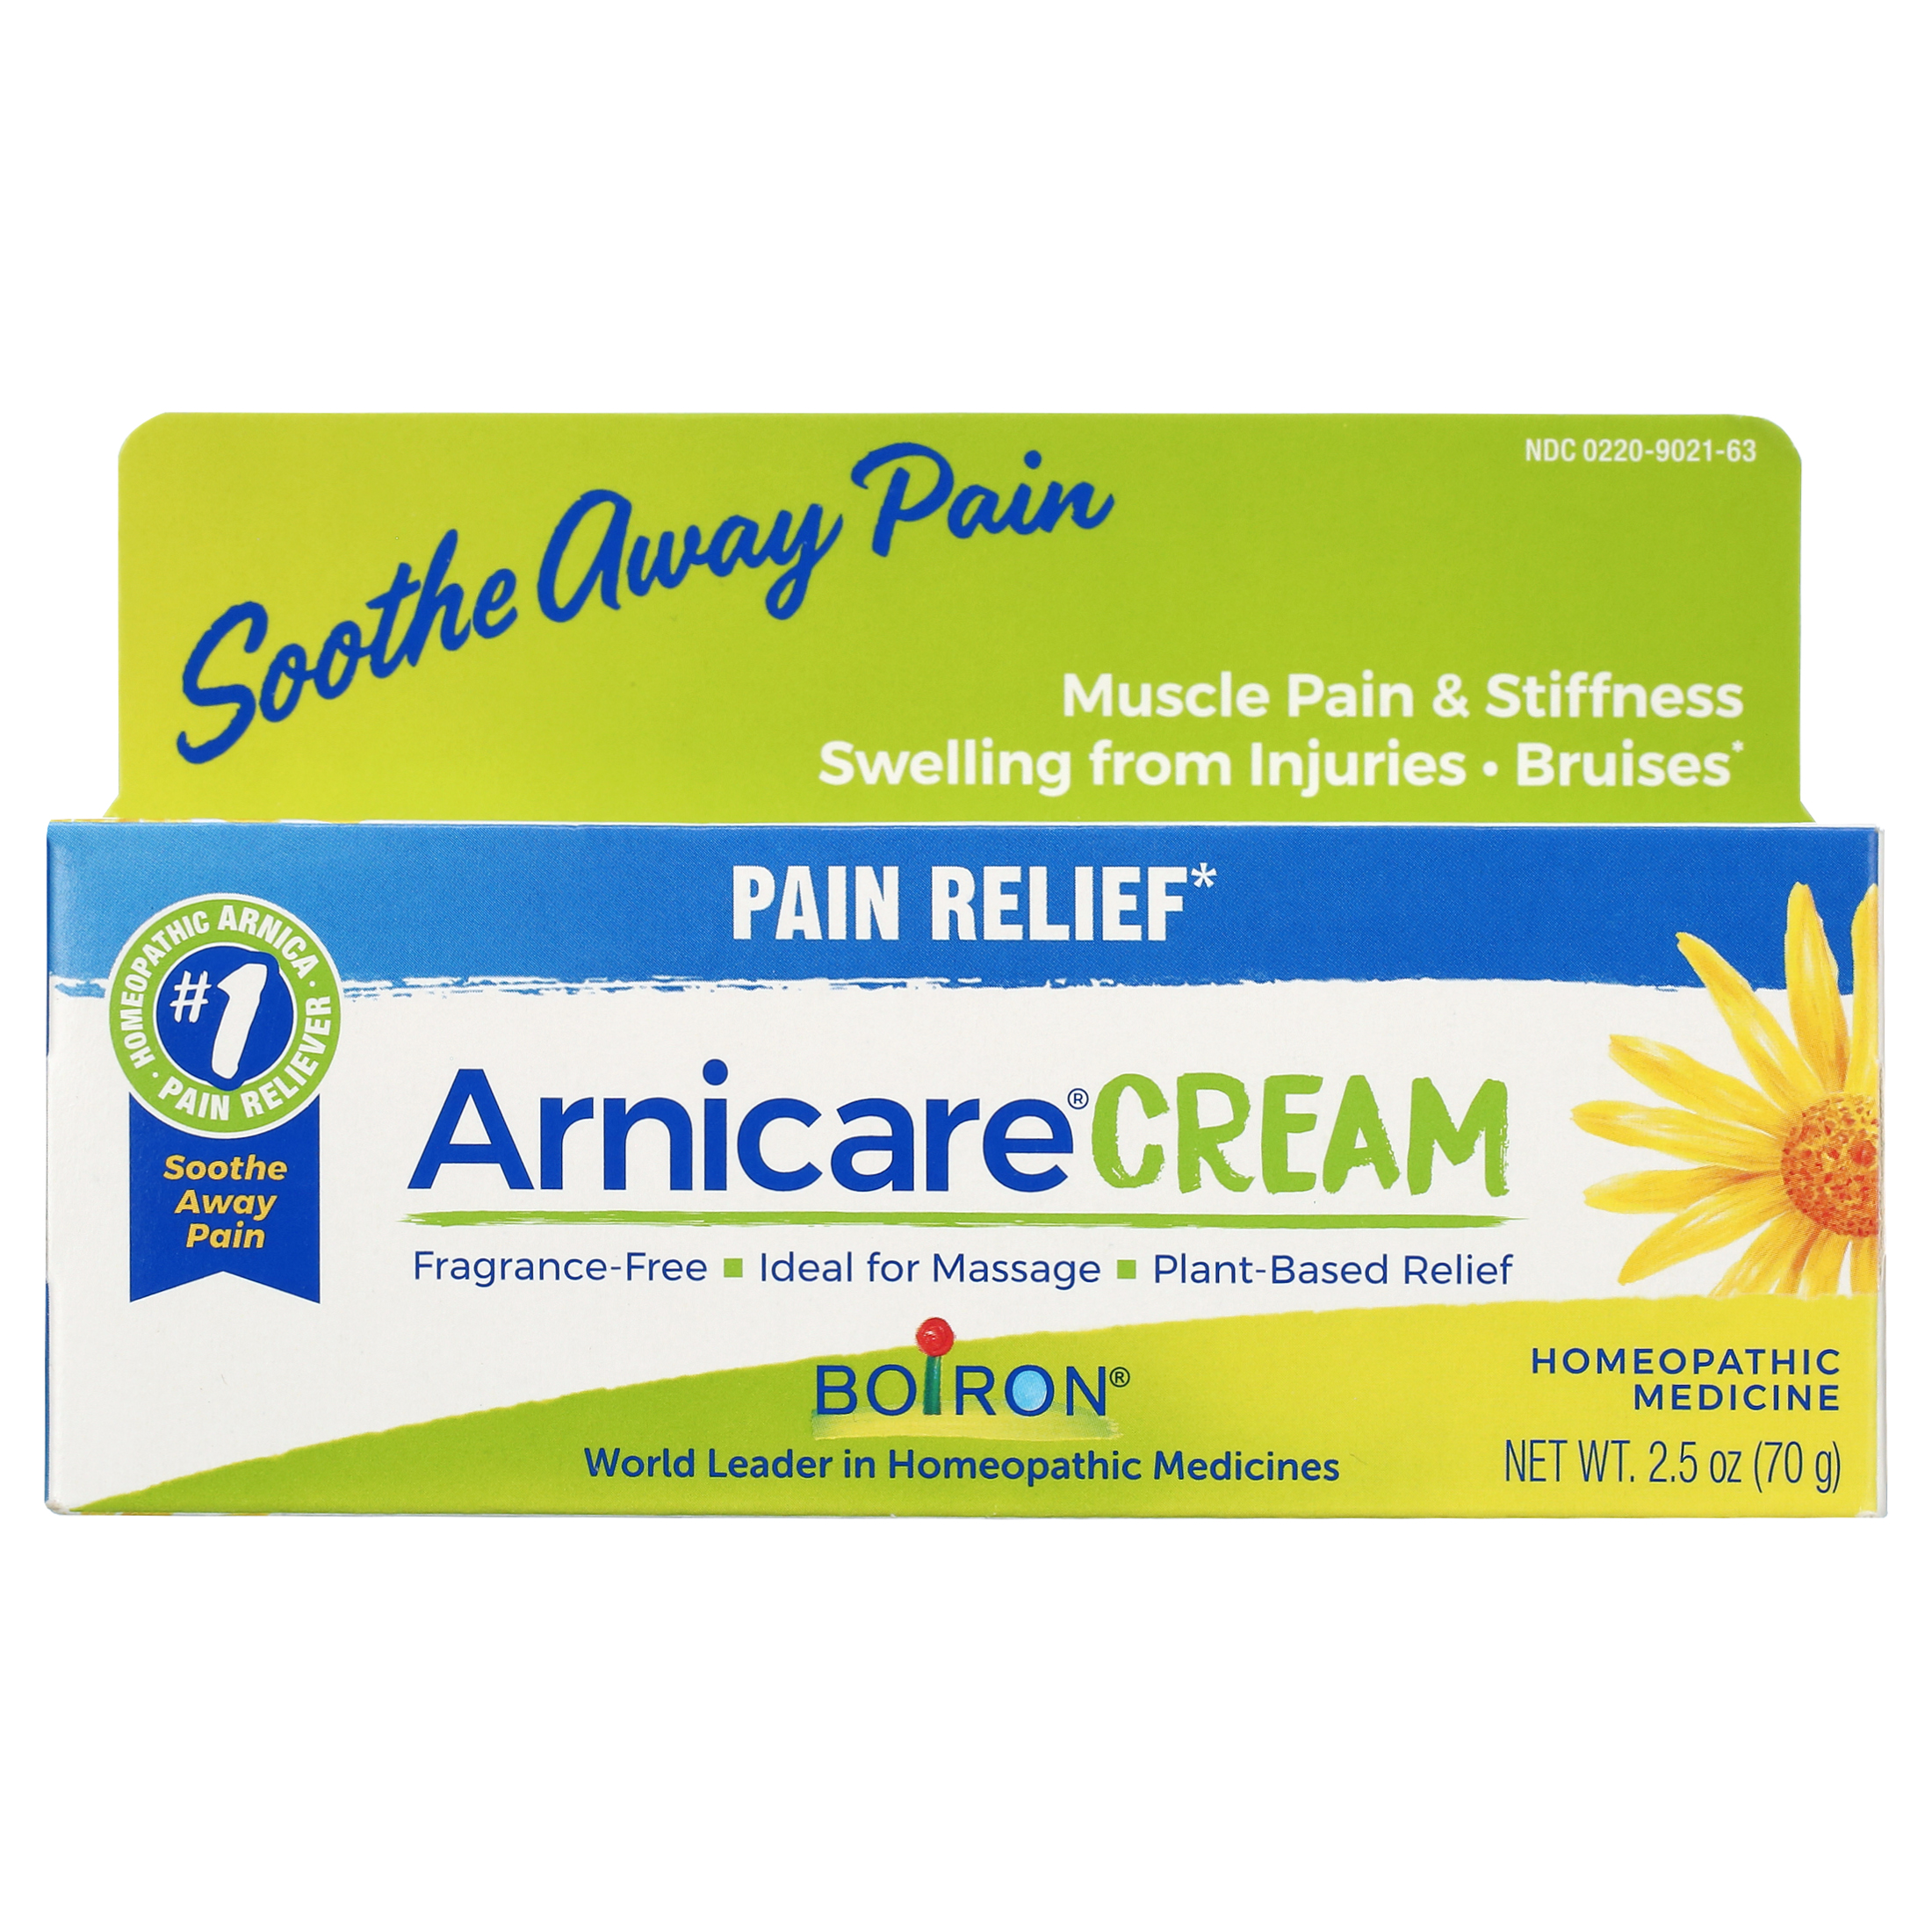 Boiron Arnicare Cream, Homeopathic Medicine for Pain Relief, Muscle Pain & Stiffness, Swelling from Injuries, Bruises, 2.5 oz - image 2 of 5